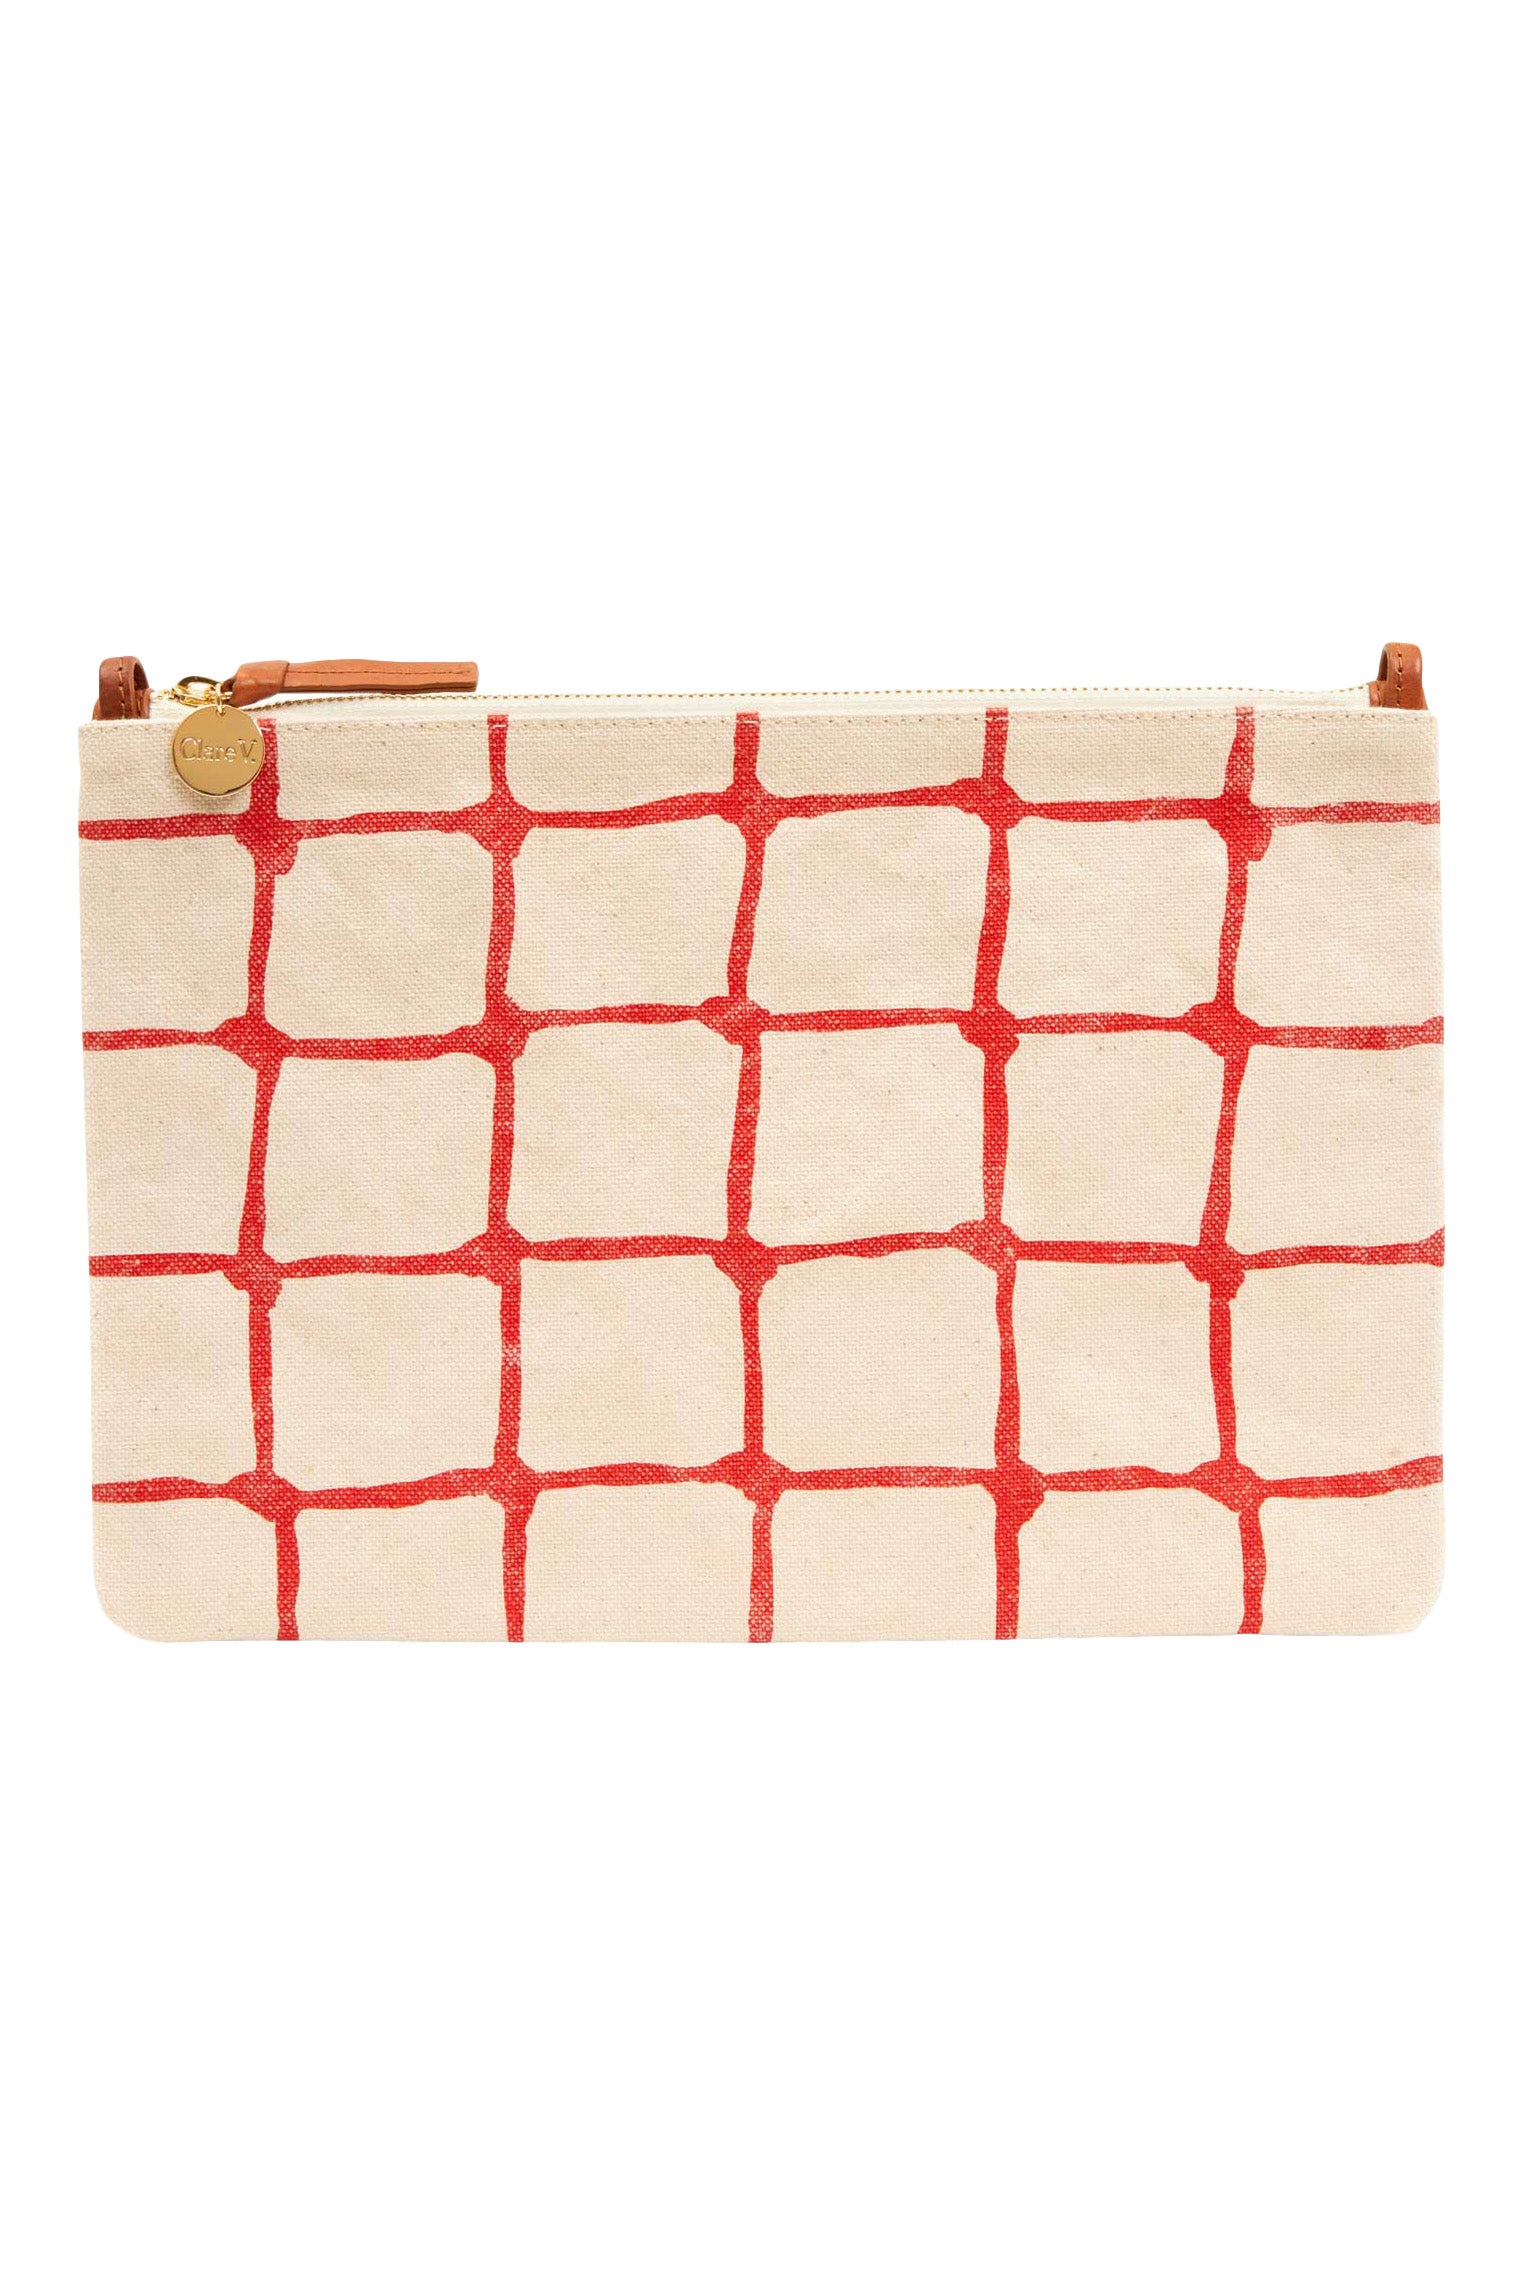 Clare V. Flat Clutch w/ Tabs in Natural w/ Bright Poppy Net Printed Canvas